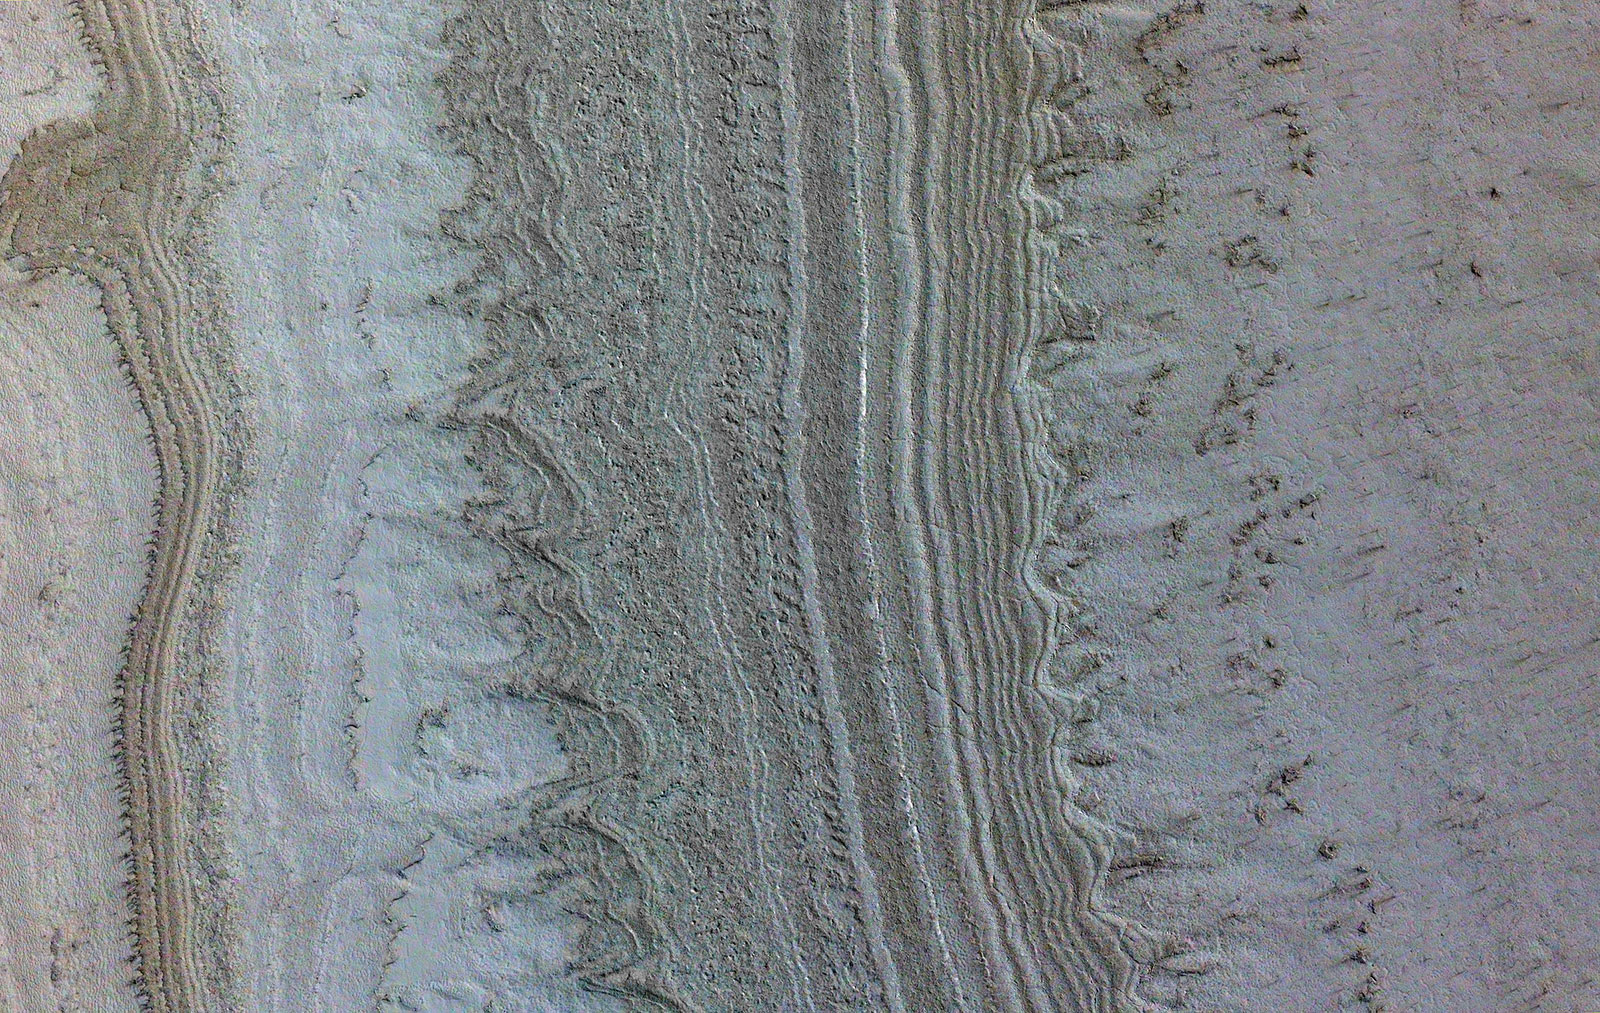 This image taken by NASA’s Mars Reconnaissance Orbiter shows ice sheets at Mars’ south pole. The spacecraft detected clays nearby this ice; scientists have proposed such clays are the source of radar reflections that have been previously interpreted as liquid water.